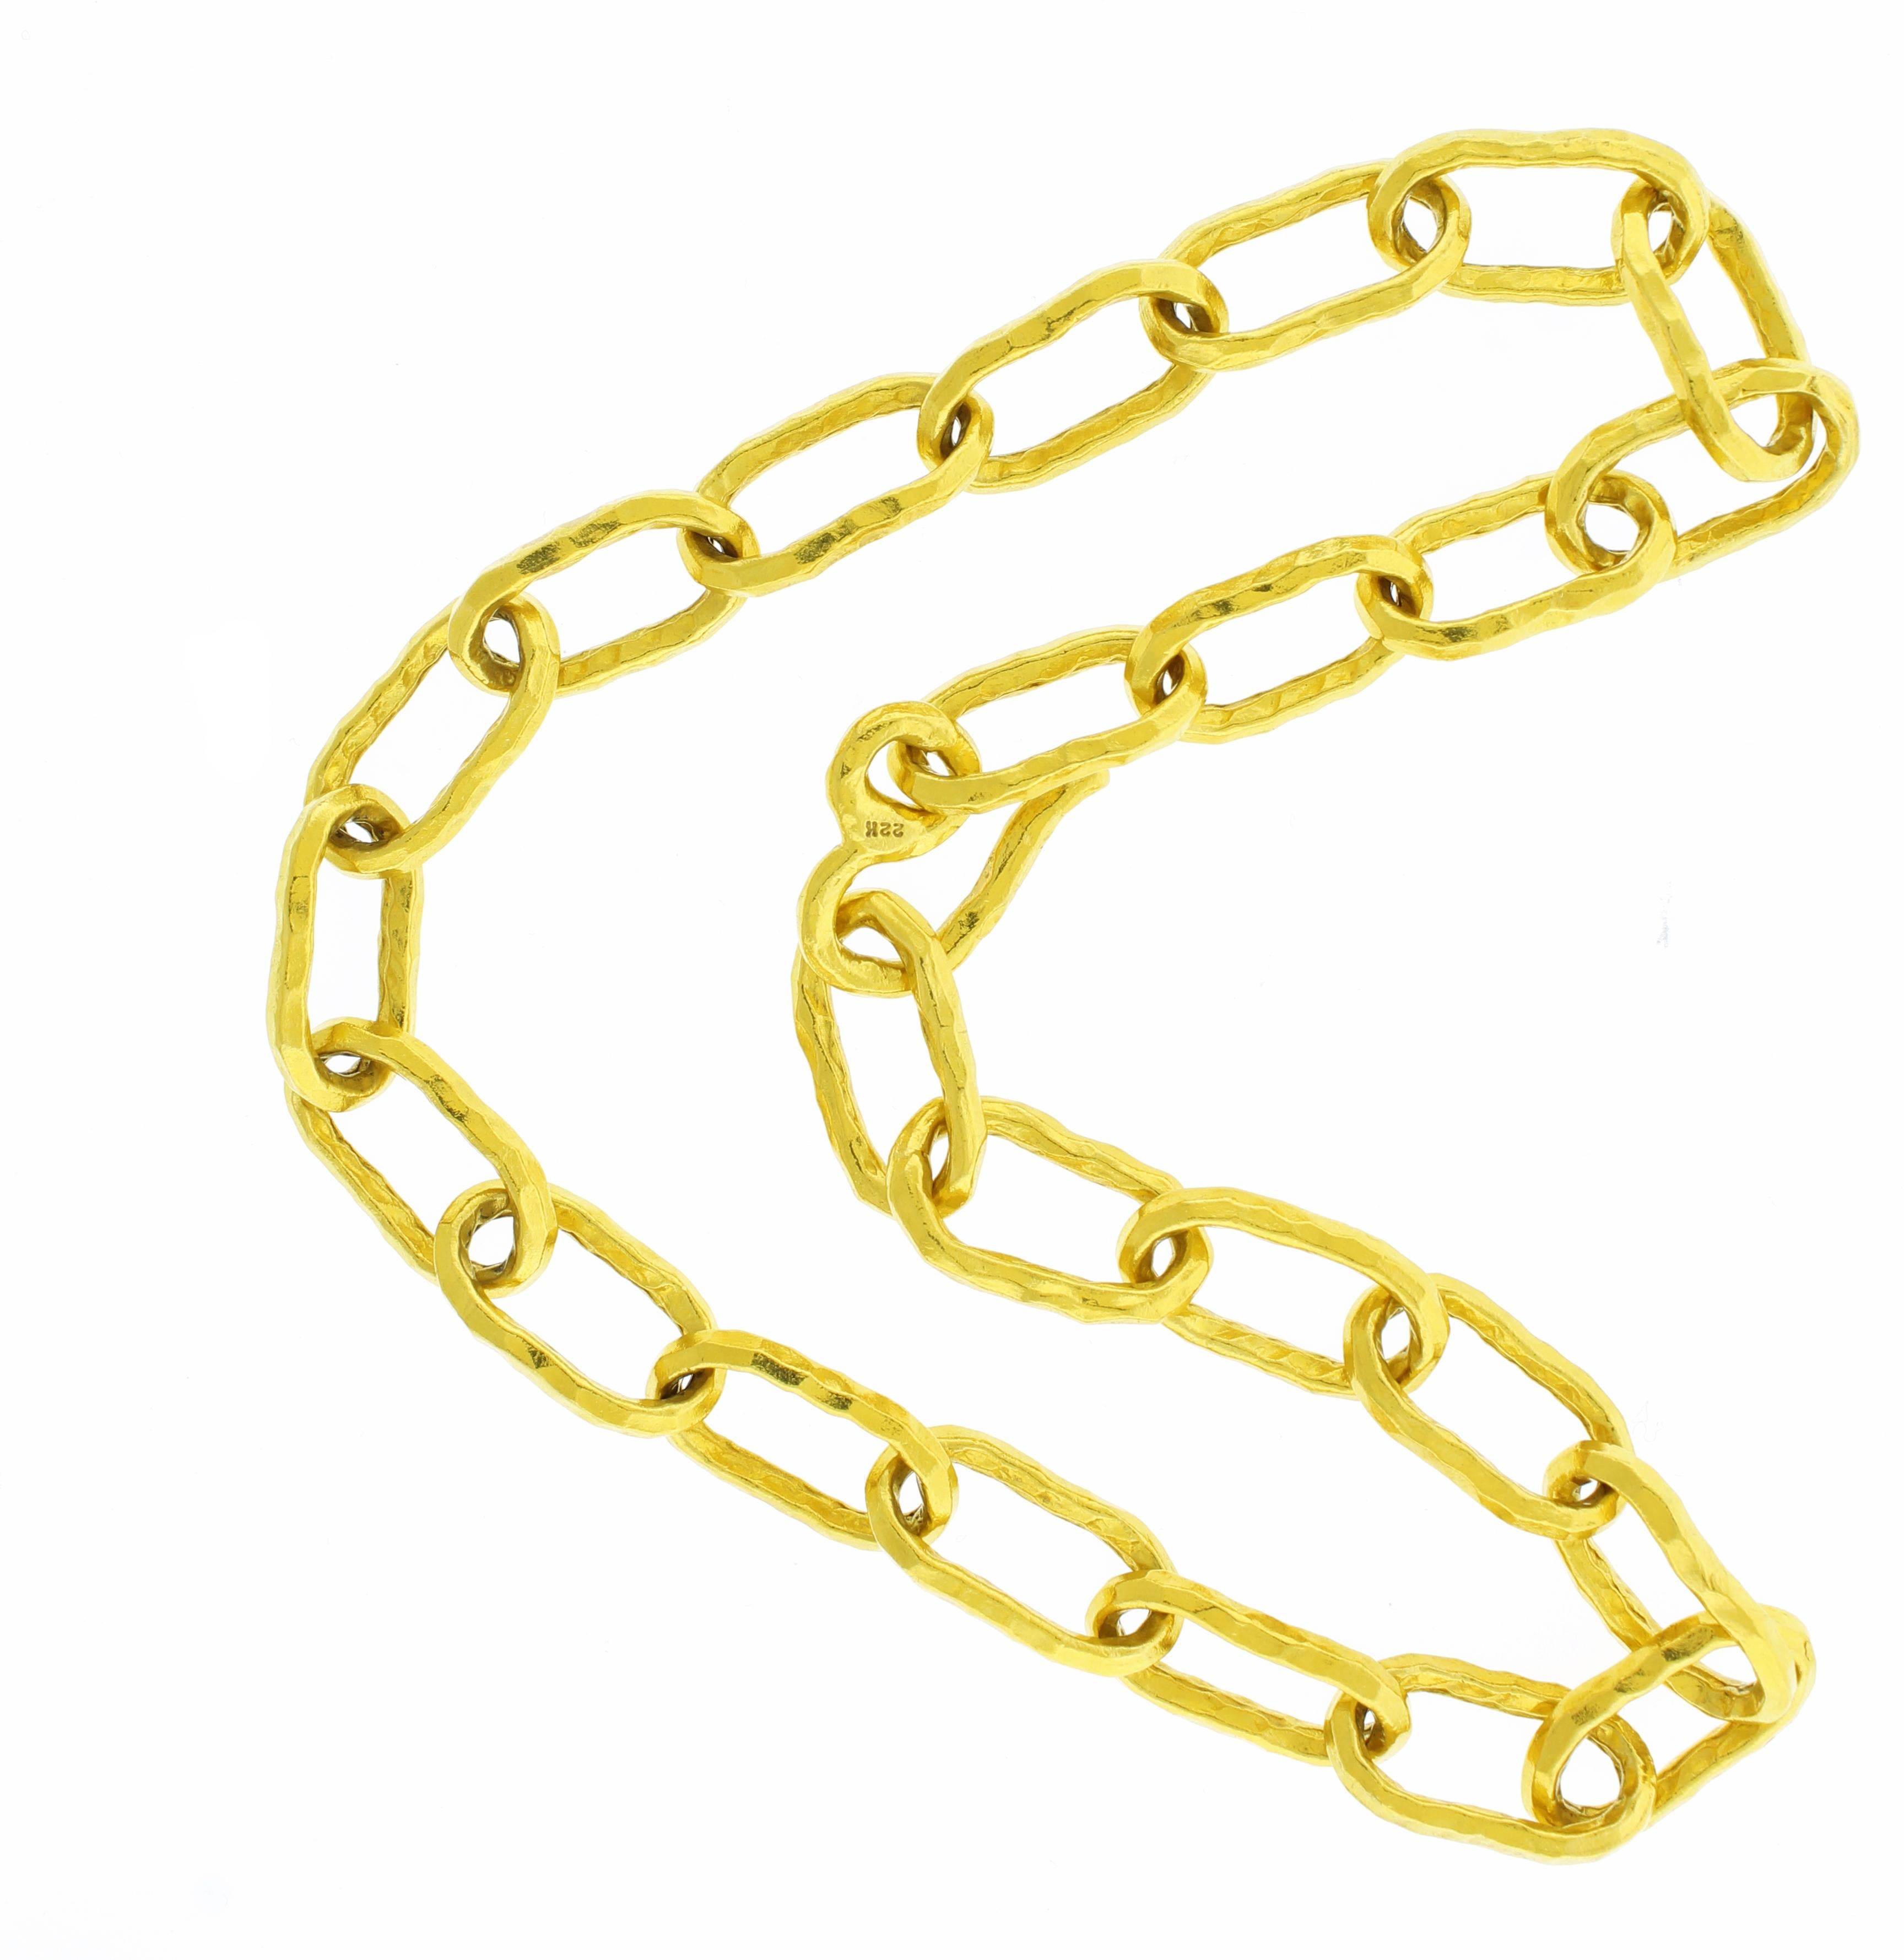 This classic Jean Mahie Large Cadene chain necklace features a textured finish on its 22kt yellow gold links that has made Jean Mahie famous.  This Jean Mahie Cadene chain is 18 inches long. 